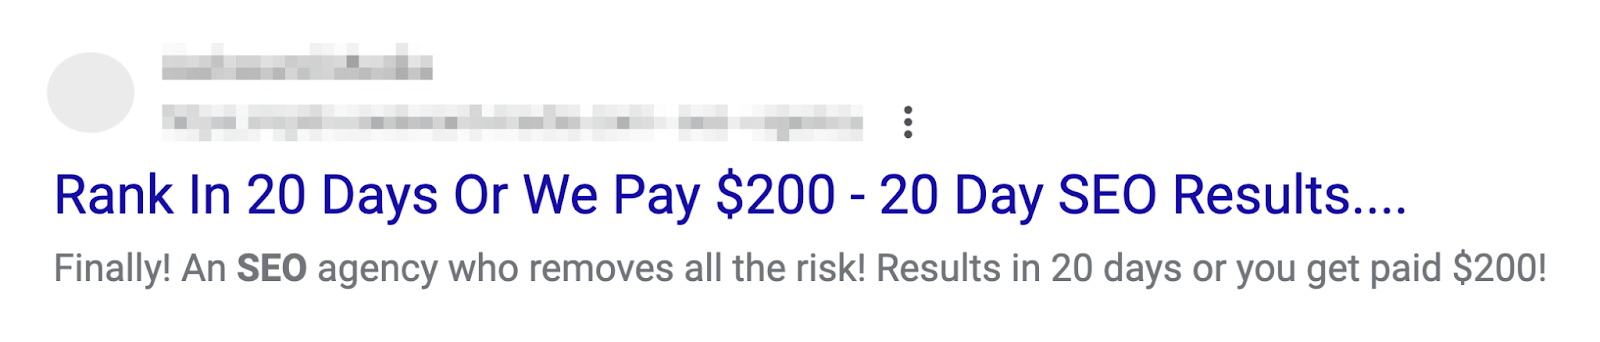 "Rank in 20 days or we pay $200" Google result